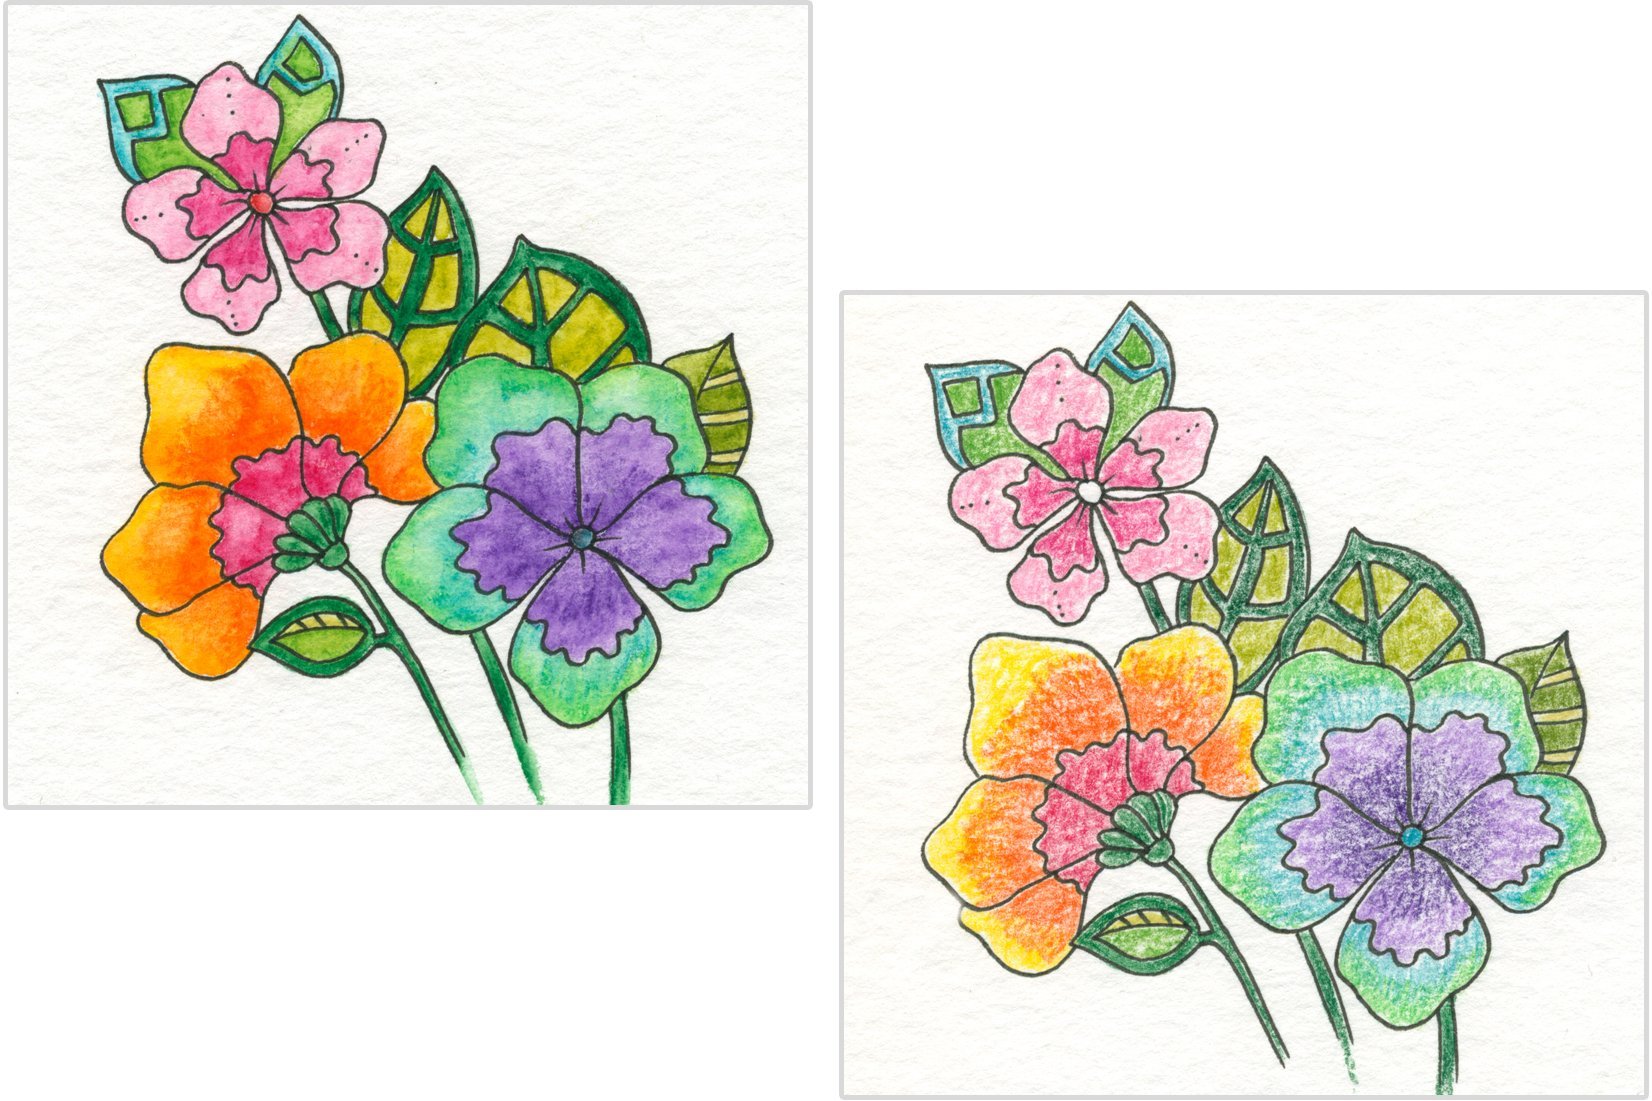 Colouring with watercolour pencils